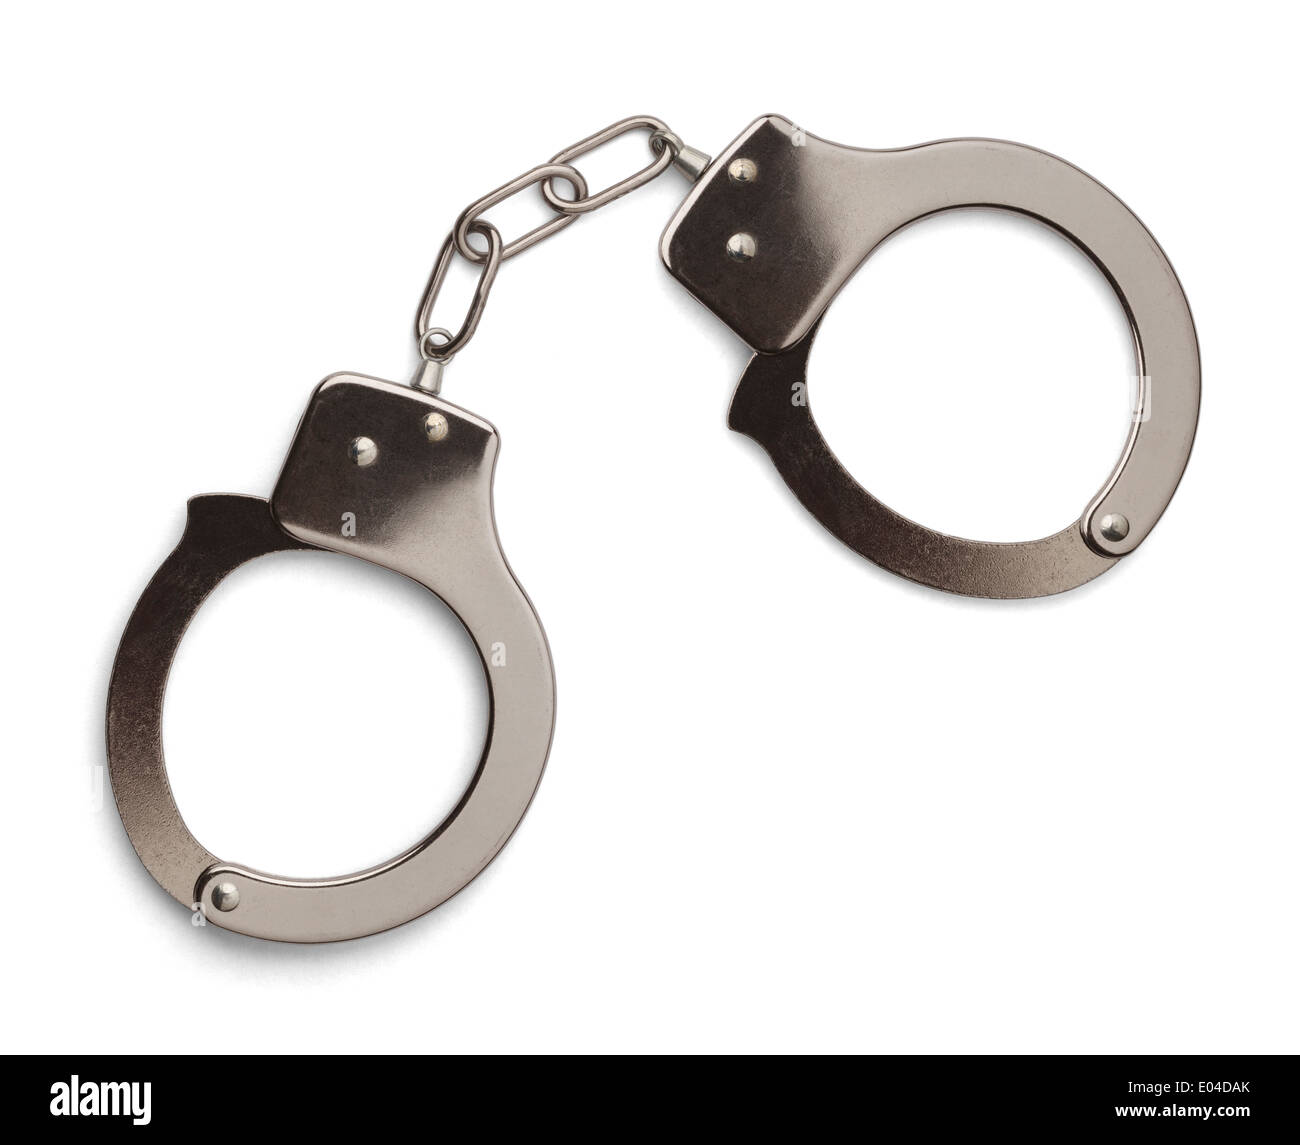 Police metal handcuffs Isolated on White Background. Stock Photo